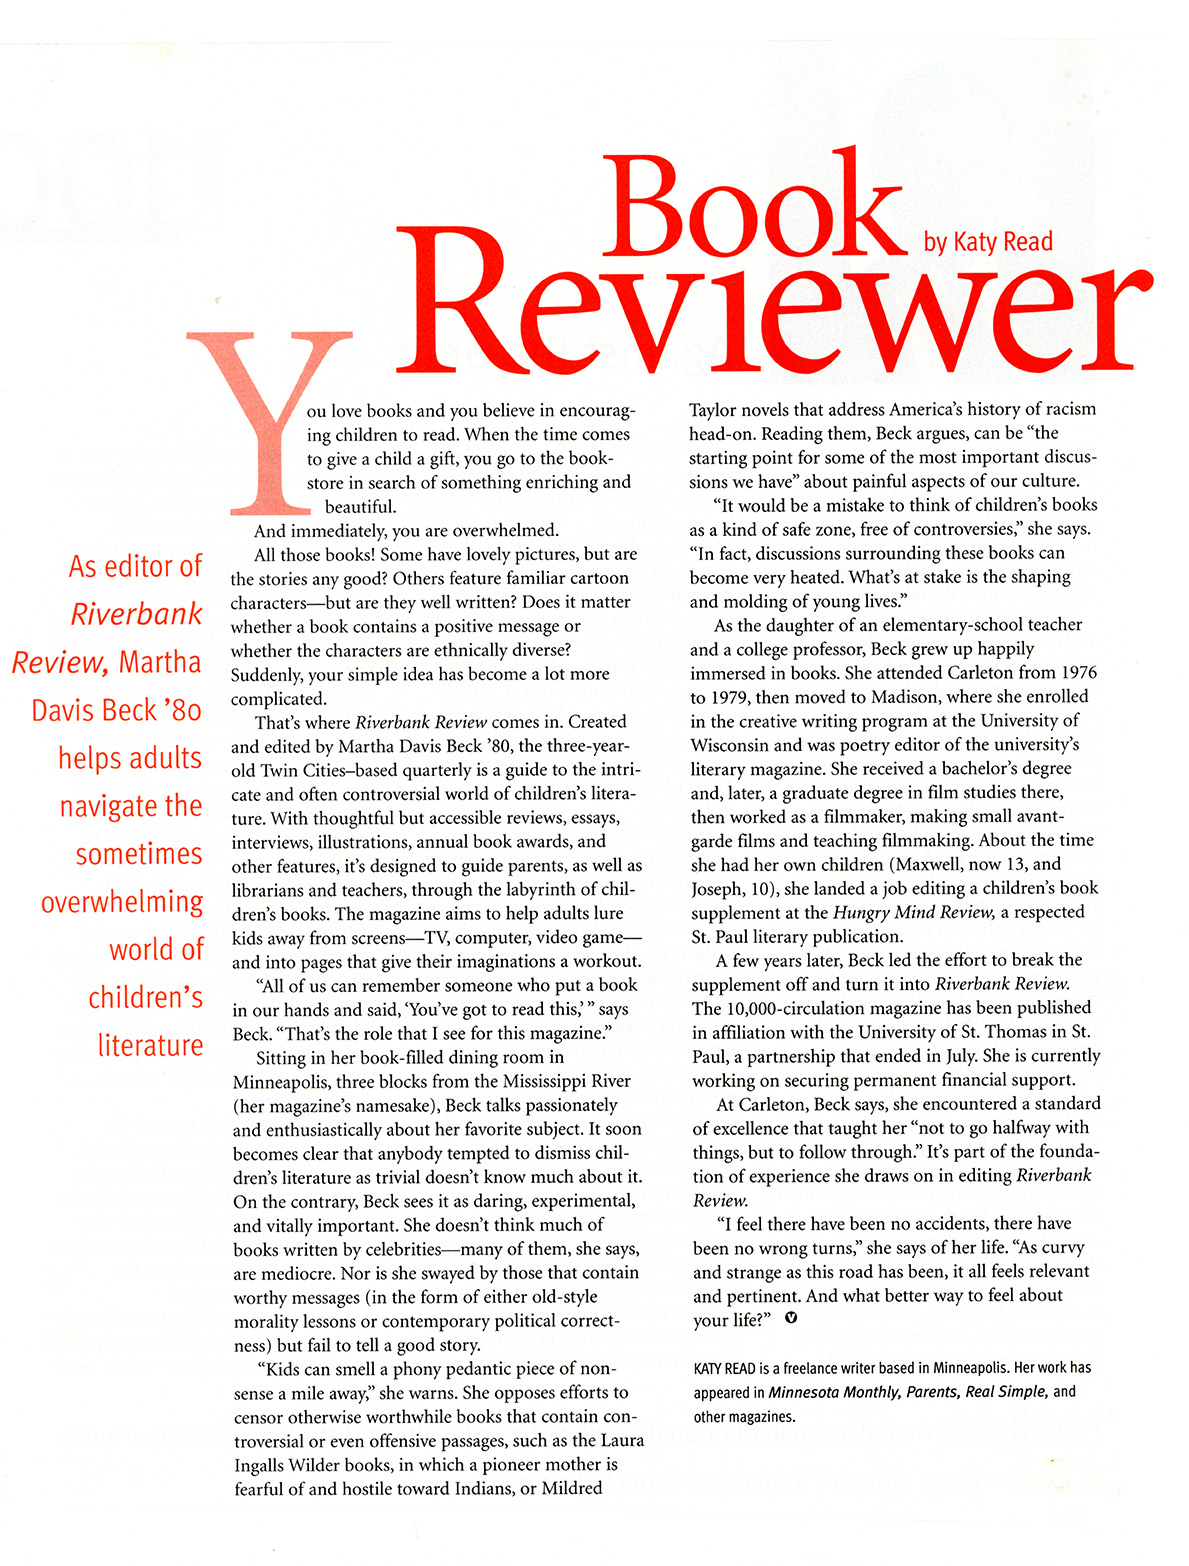 Book Reviewer article about Riverbank Review